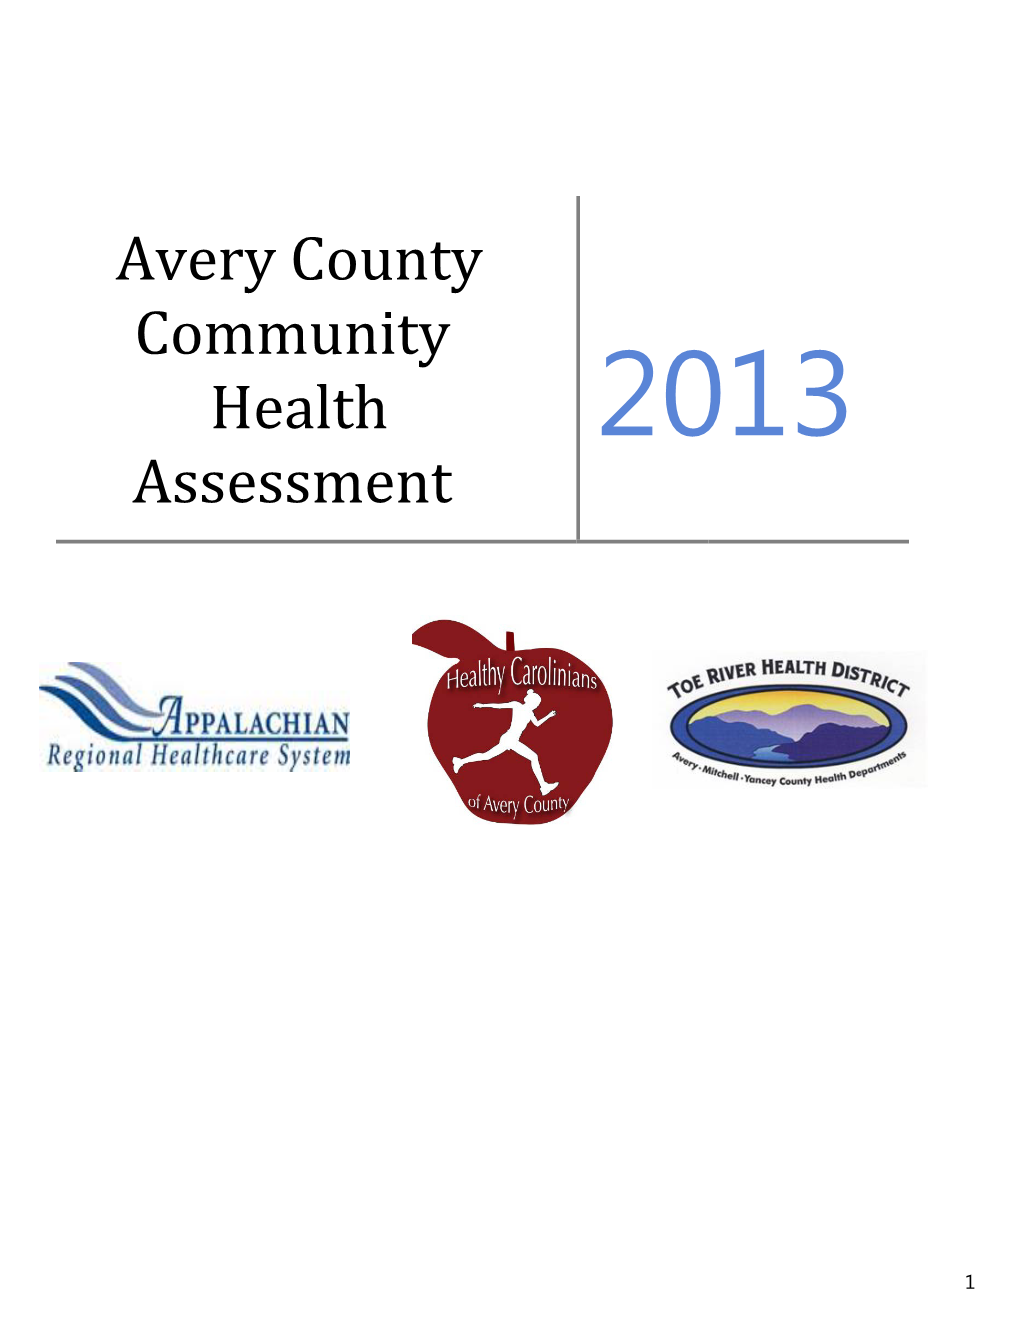 Avery County Community Health Assessment